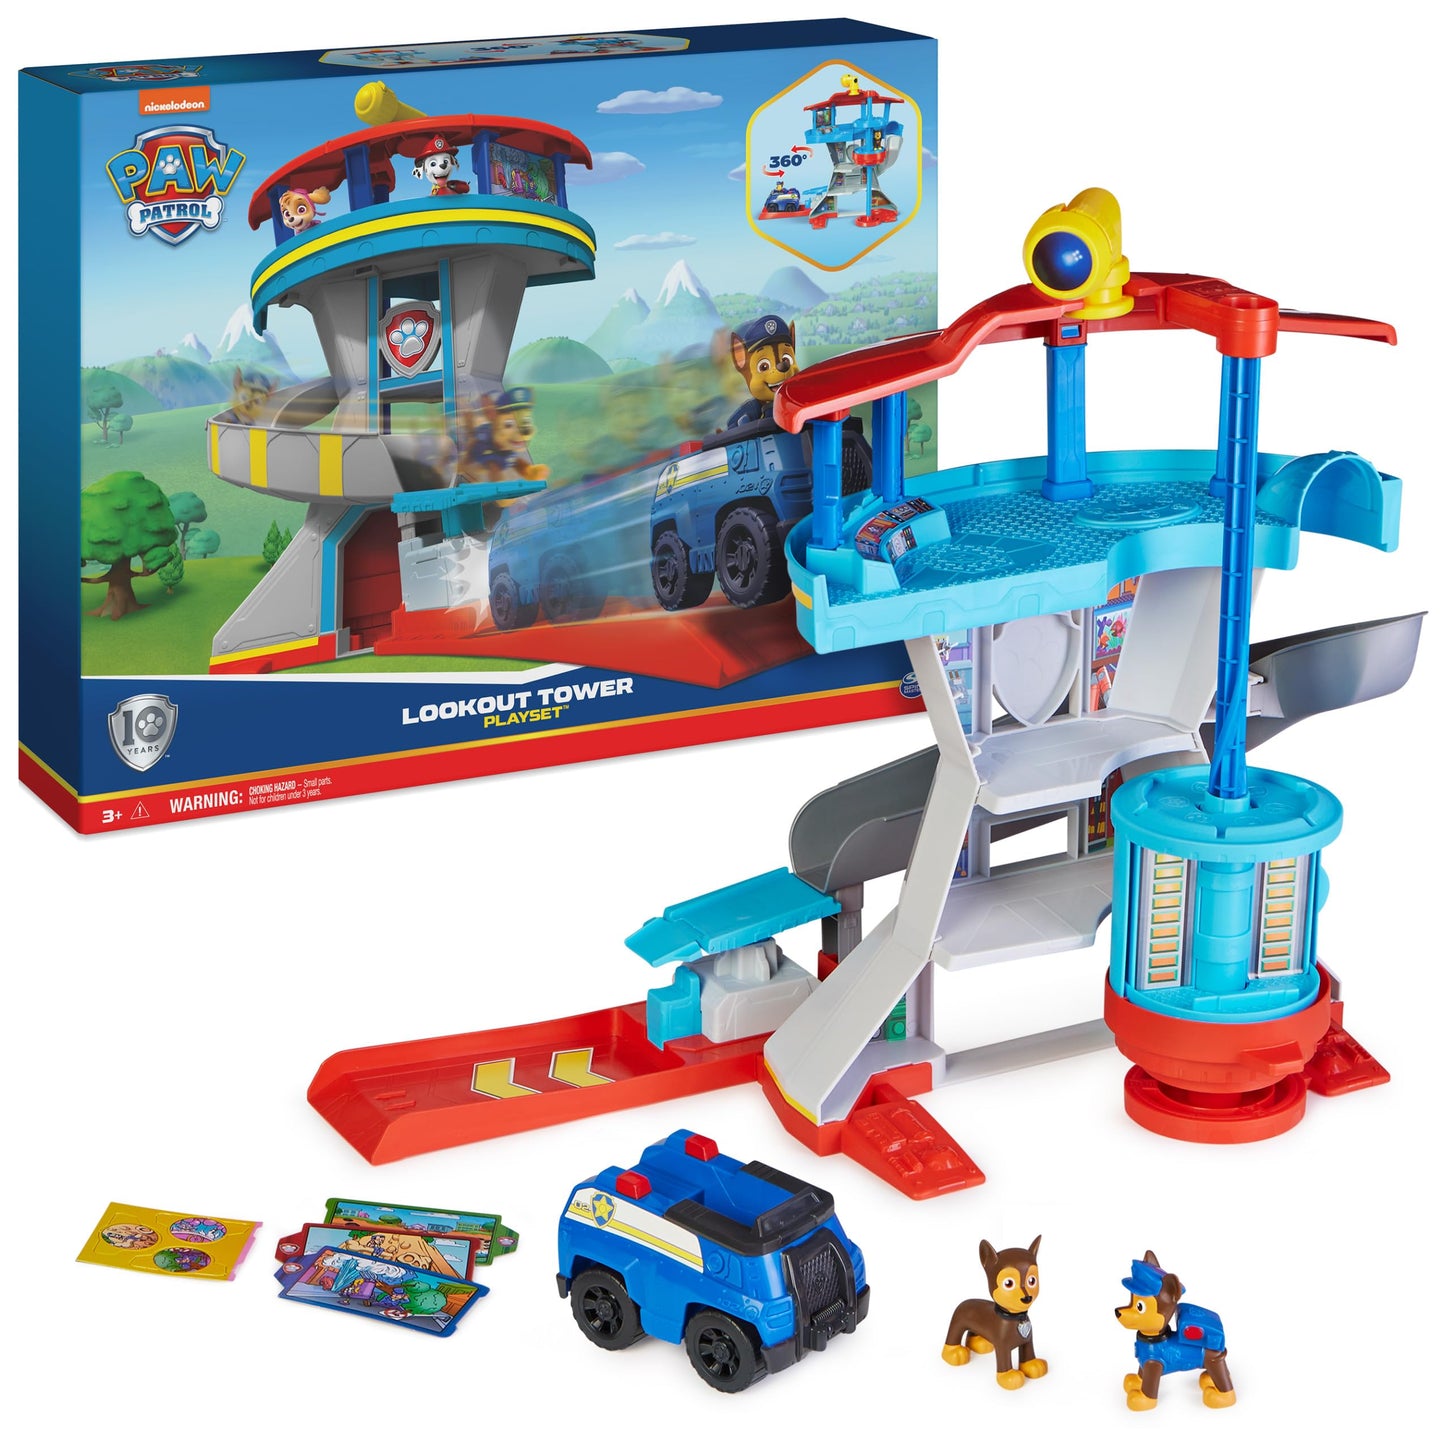 Paw Patrol Lookout Tower Playset with Toy Car Launcher, 2 Chase Action Figures, Chase’s Police Cruiser and Accessories, Kids Toys for Ages 3 and up